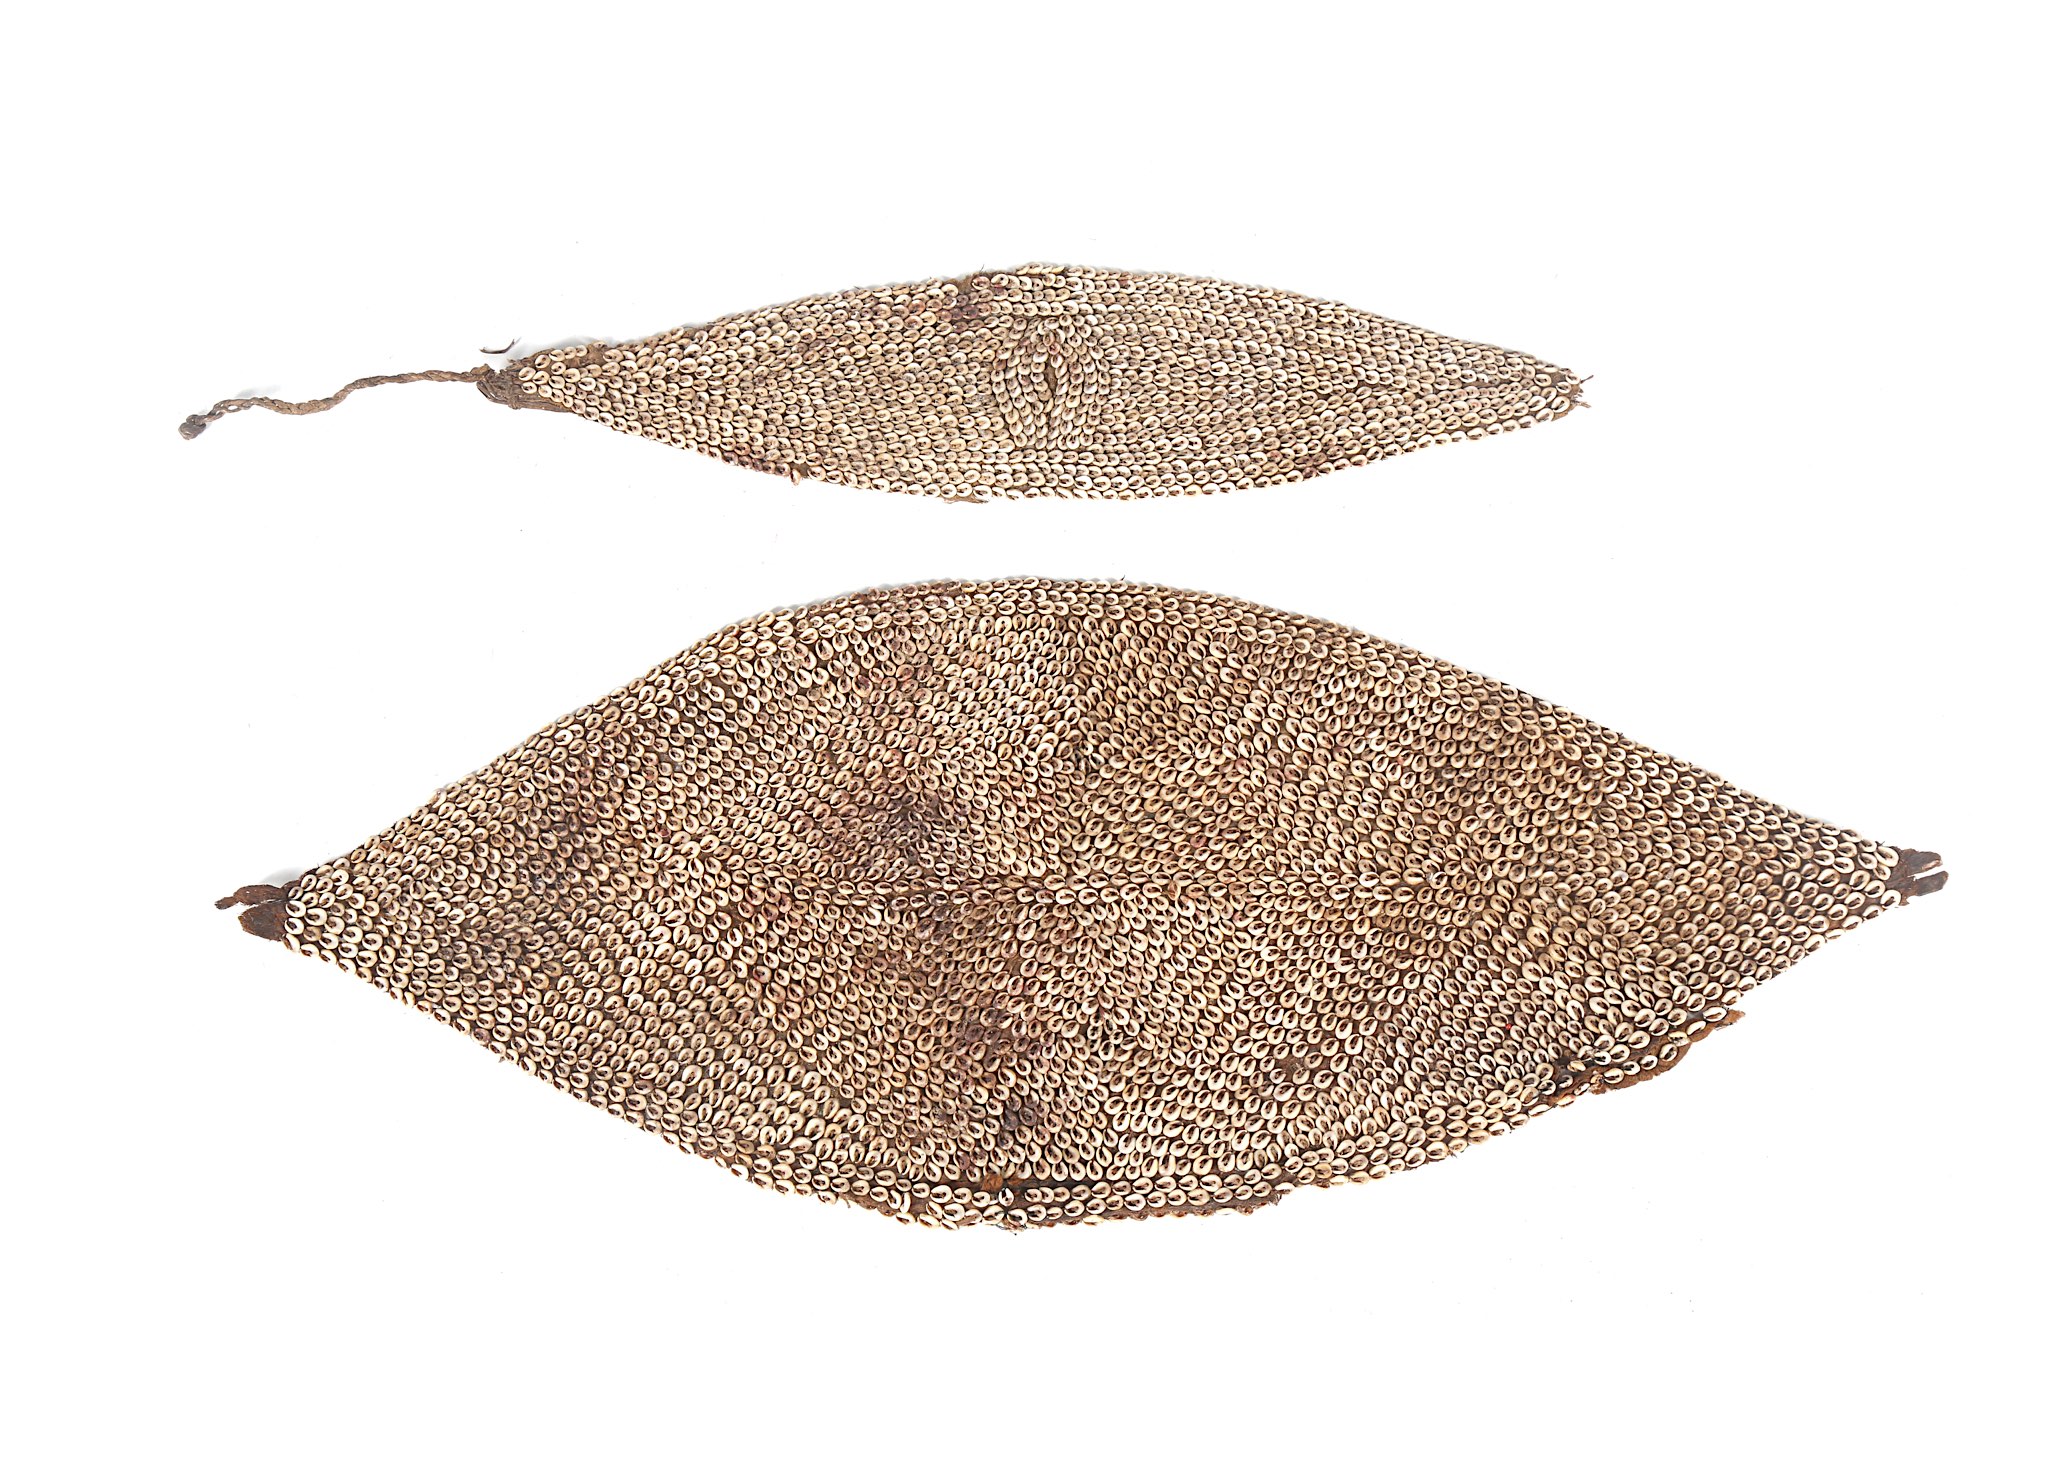 A group of ethnographic objects, including two leaf shaped head and body fibre ornaments for